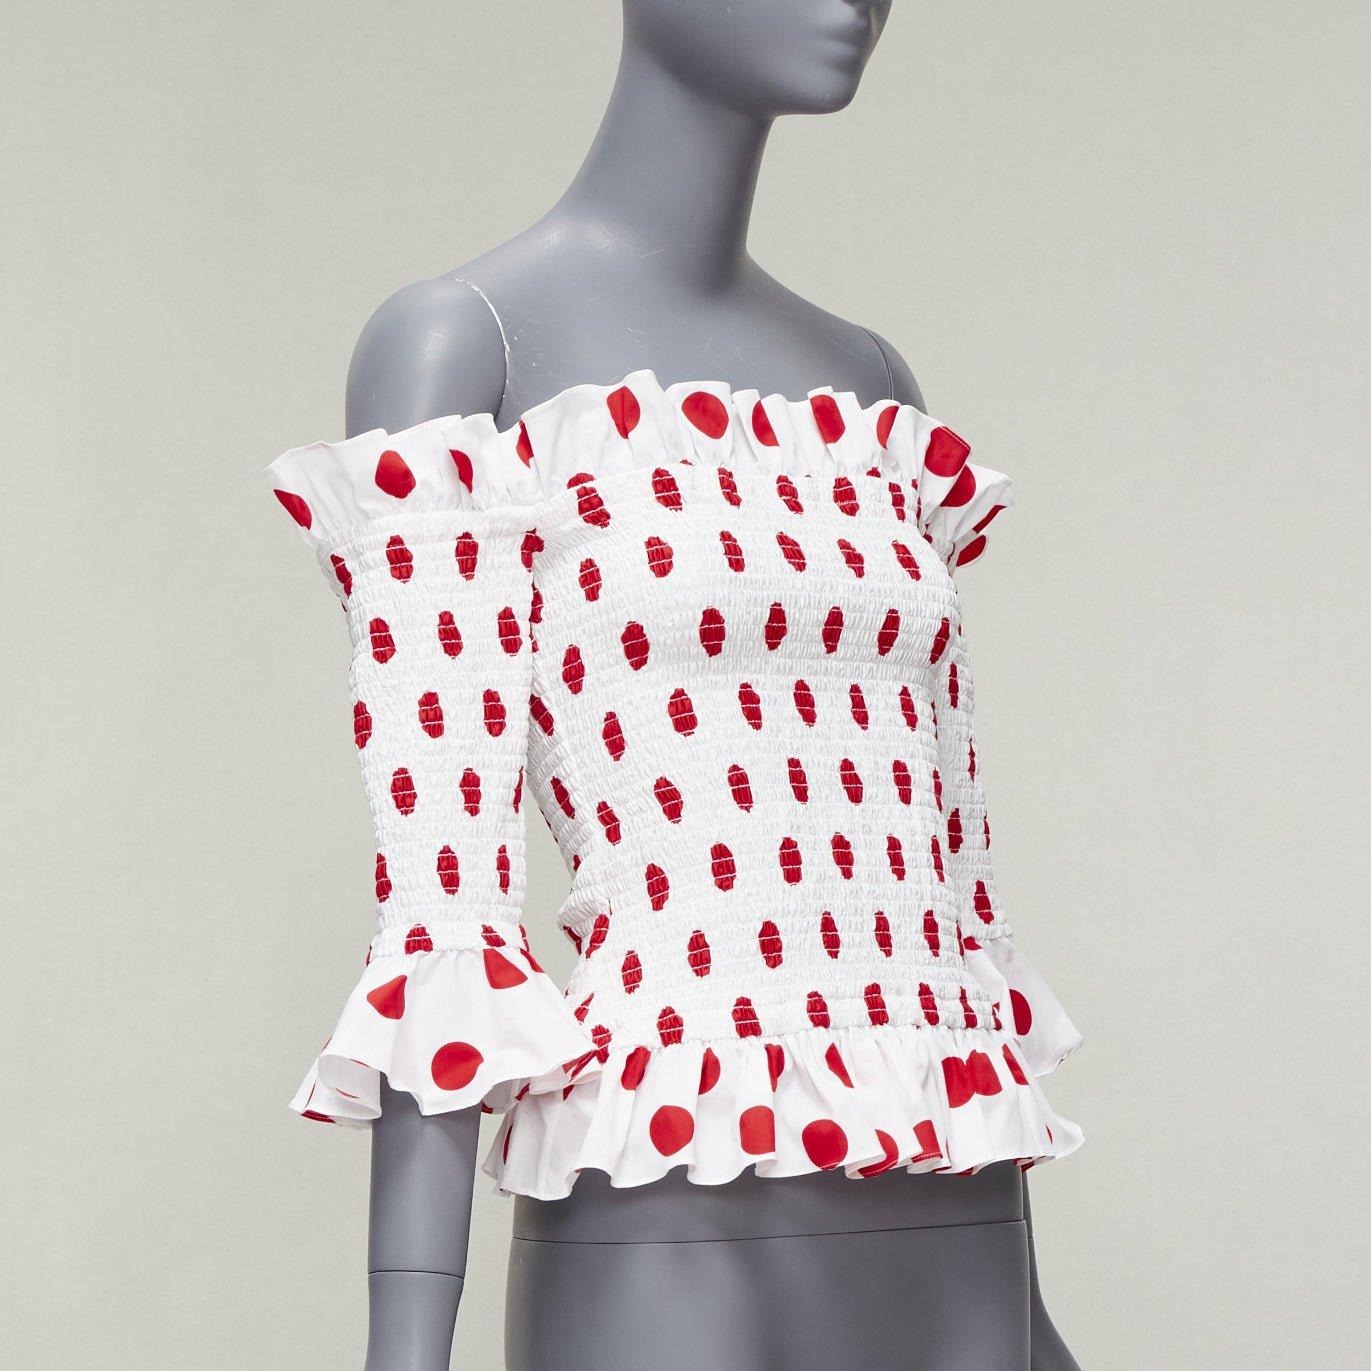 CAROLINE CONSTAS white red polka dot cotton ruffle ruched top XS
Reference: AAWC/A00664
Brand: Caroline Constas
Material: Cotton, Blend
Color: White, Red
Pattern: Polka Dot
Closure: Elasticated
Extra Details: Elasticated body.
Made in: United